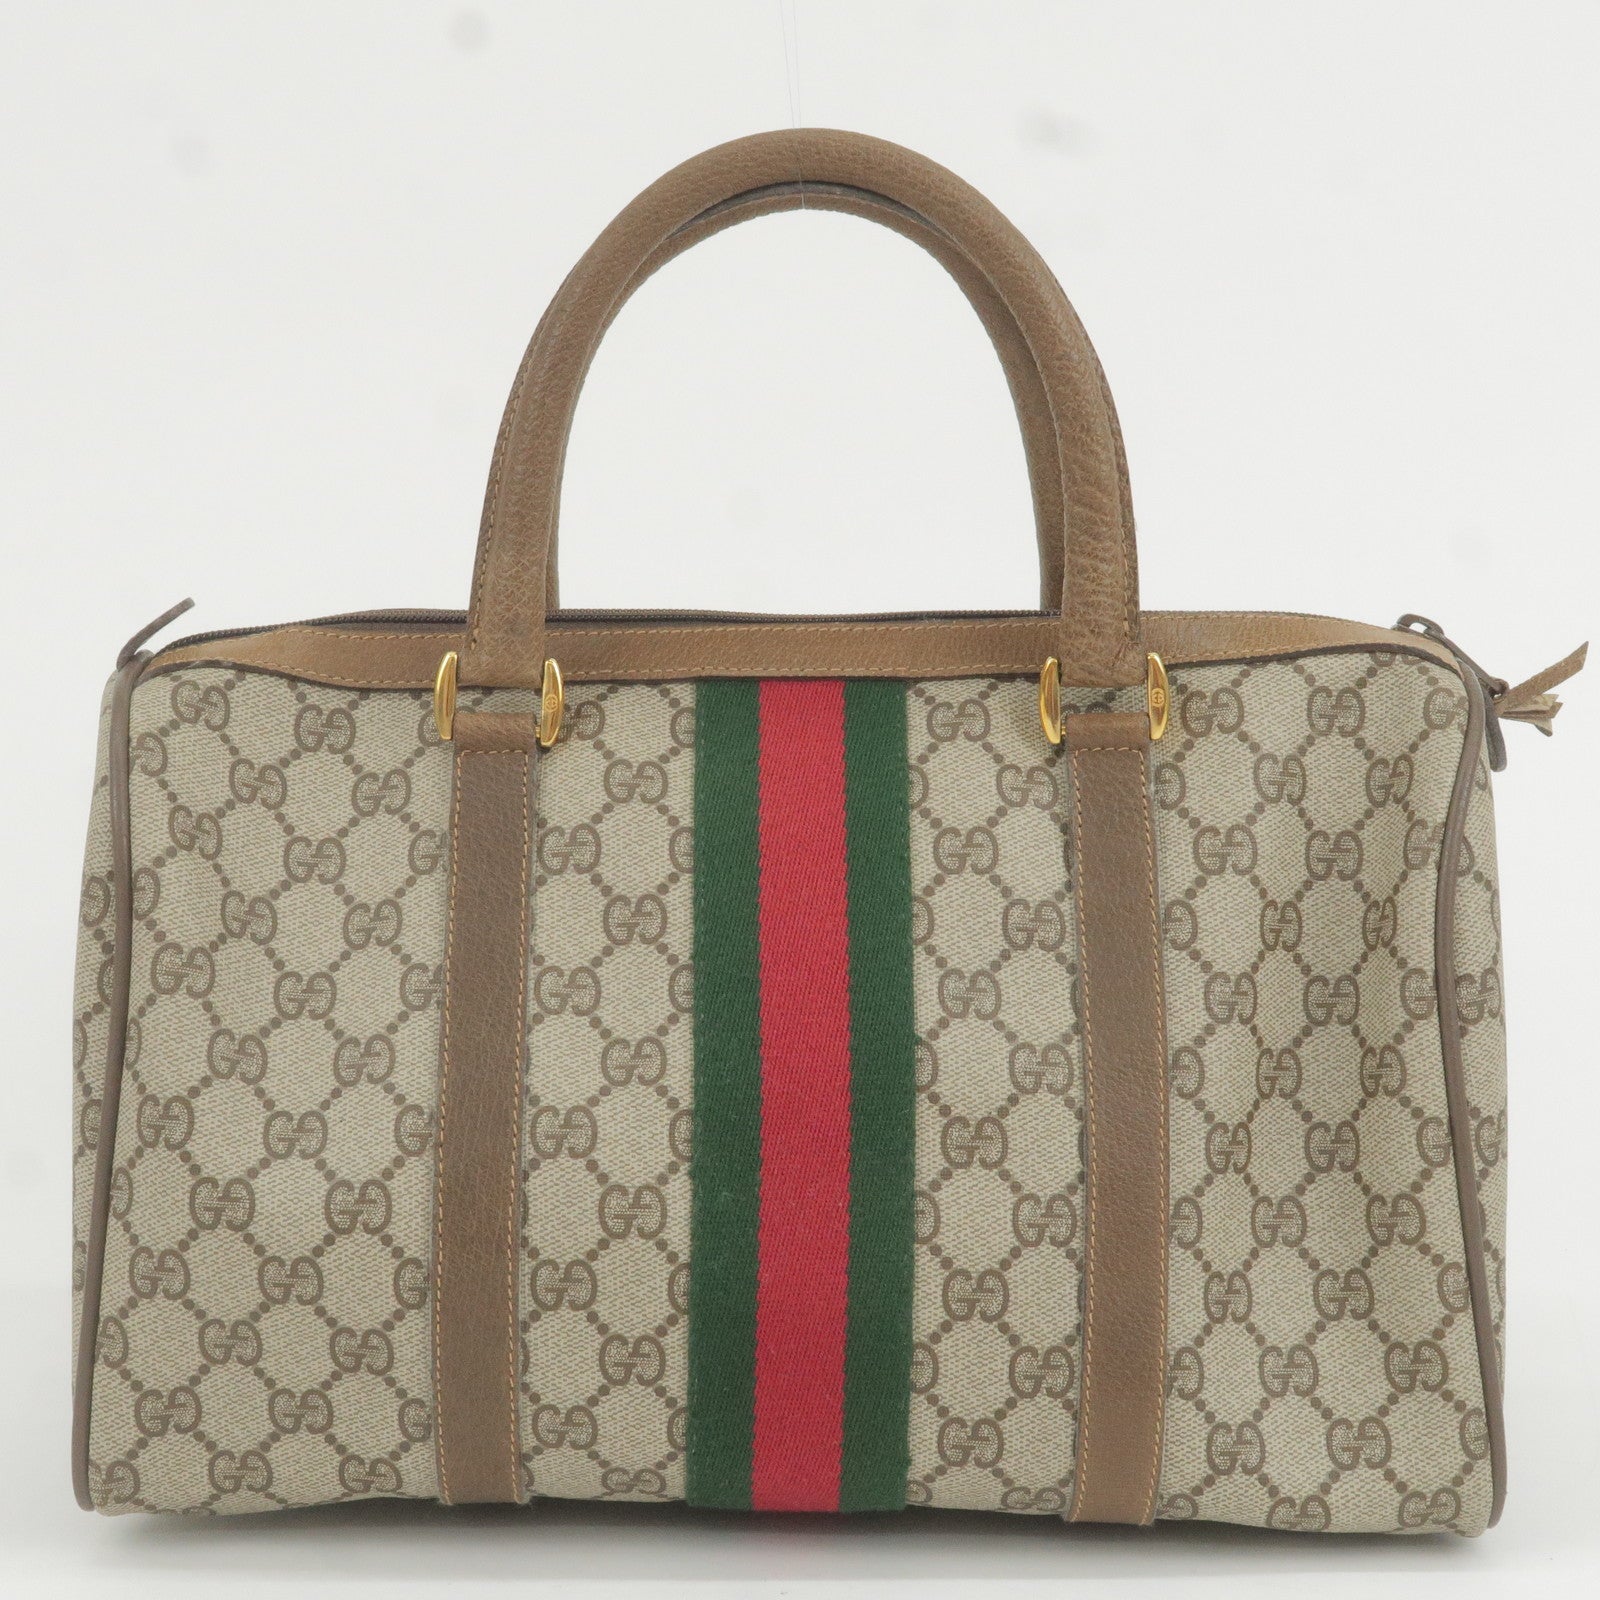 GUCCI-Sherry-Old-Gucci-GG-Plus-Leather-Boston-Bag-39.02.007 – dct 